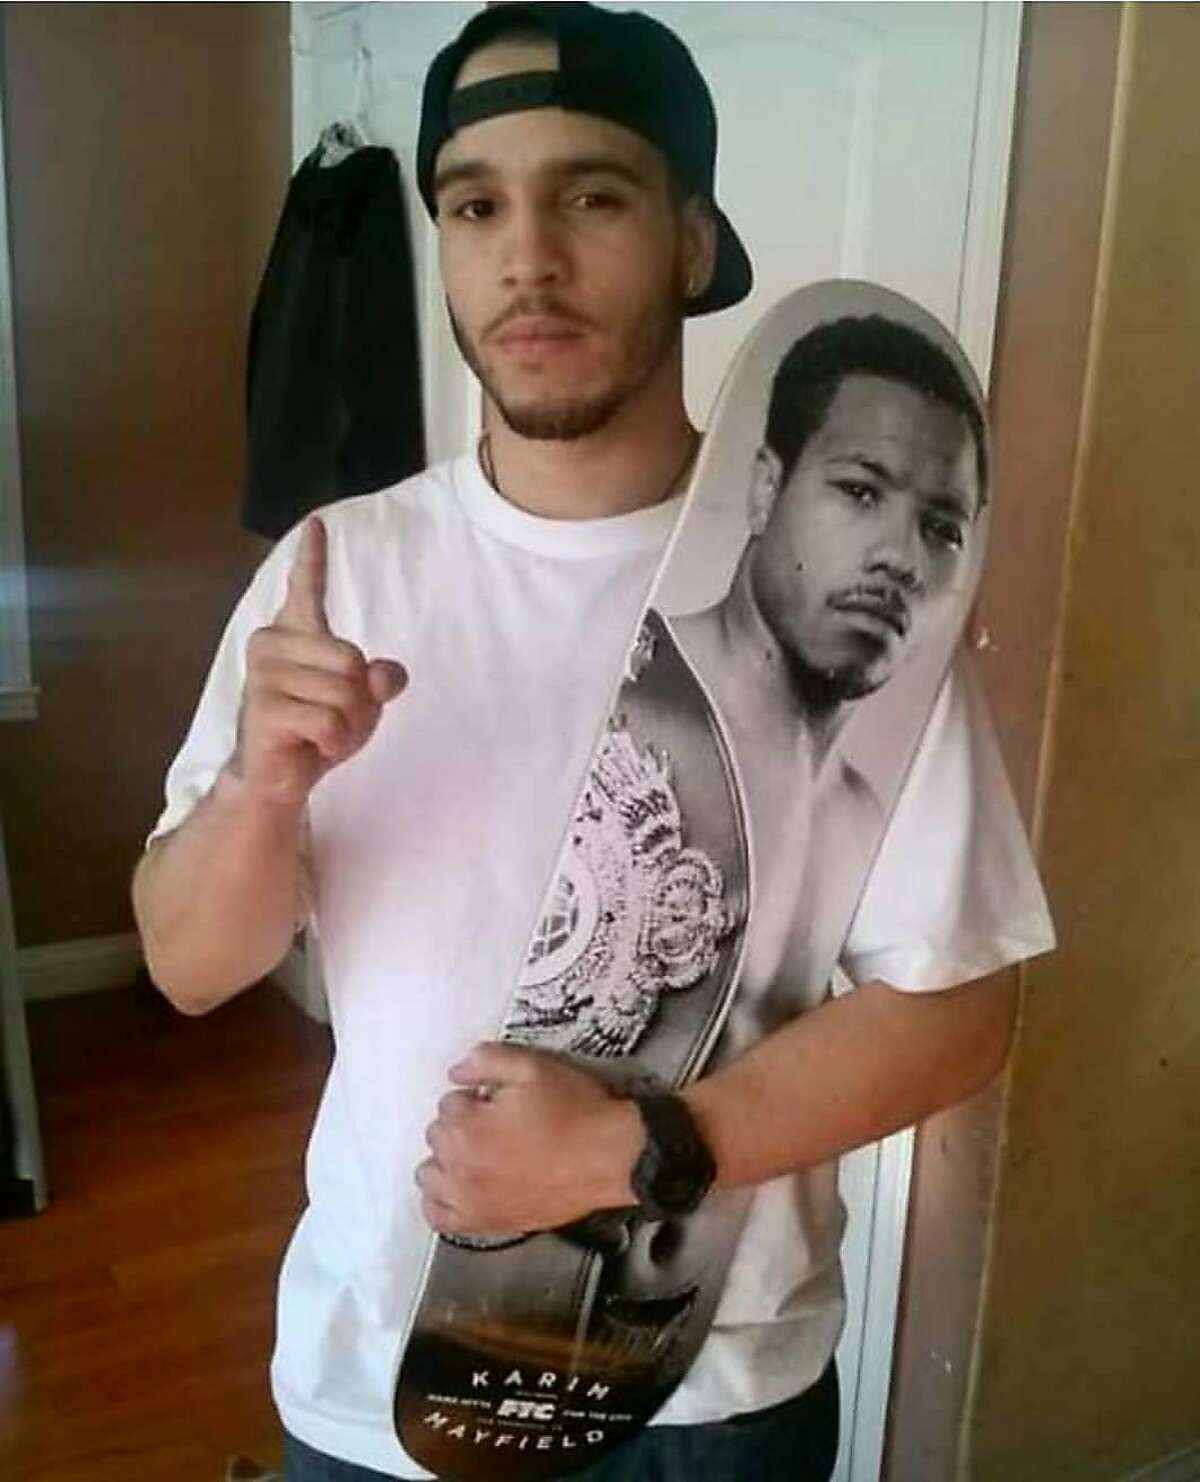 Sahleem Tindle, brother of boxer Karim Mayfield, holds a skateboard with his brother's likeness. Sahleem Tindle was shot and killed by a BART police officer in Oakland back on Jan. 3, 2018. Courtesy Karim Mayfield